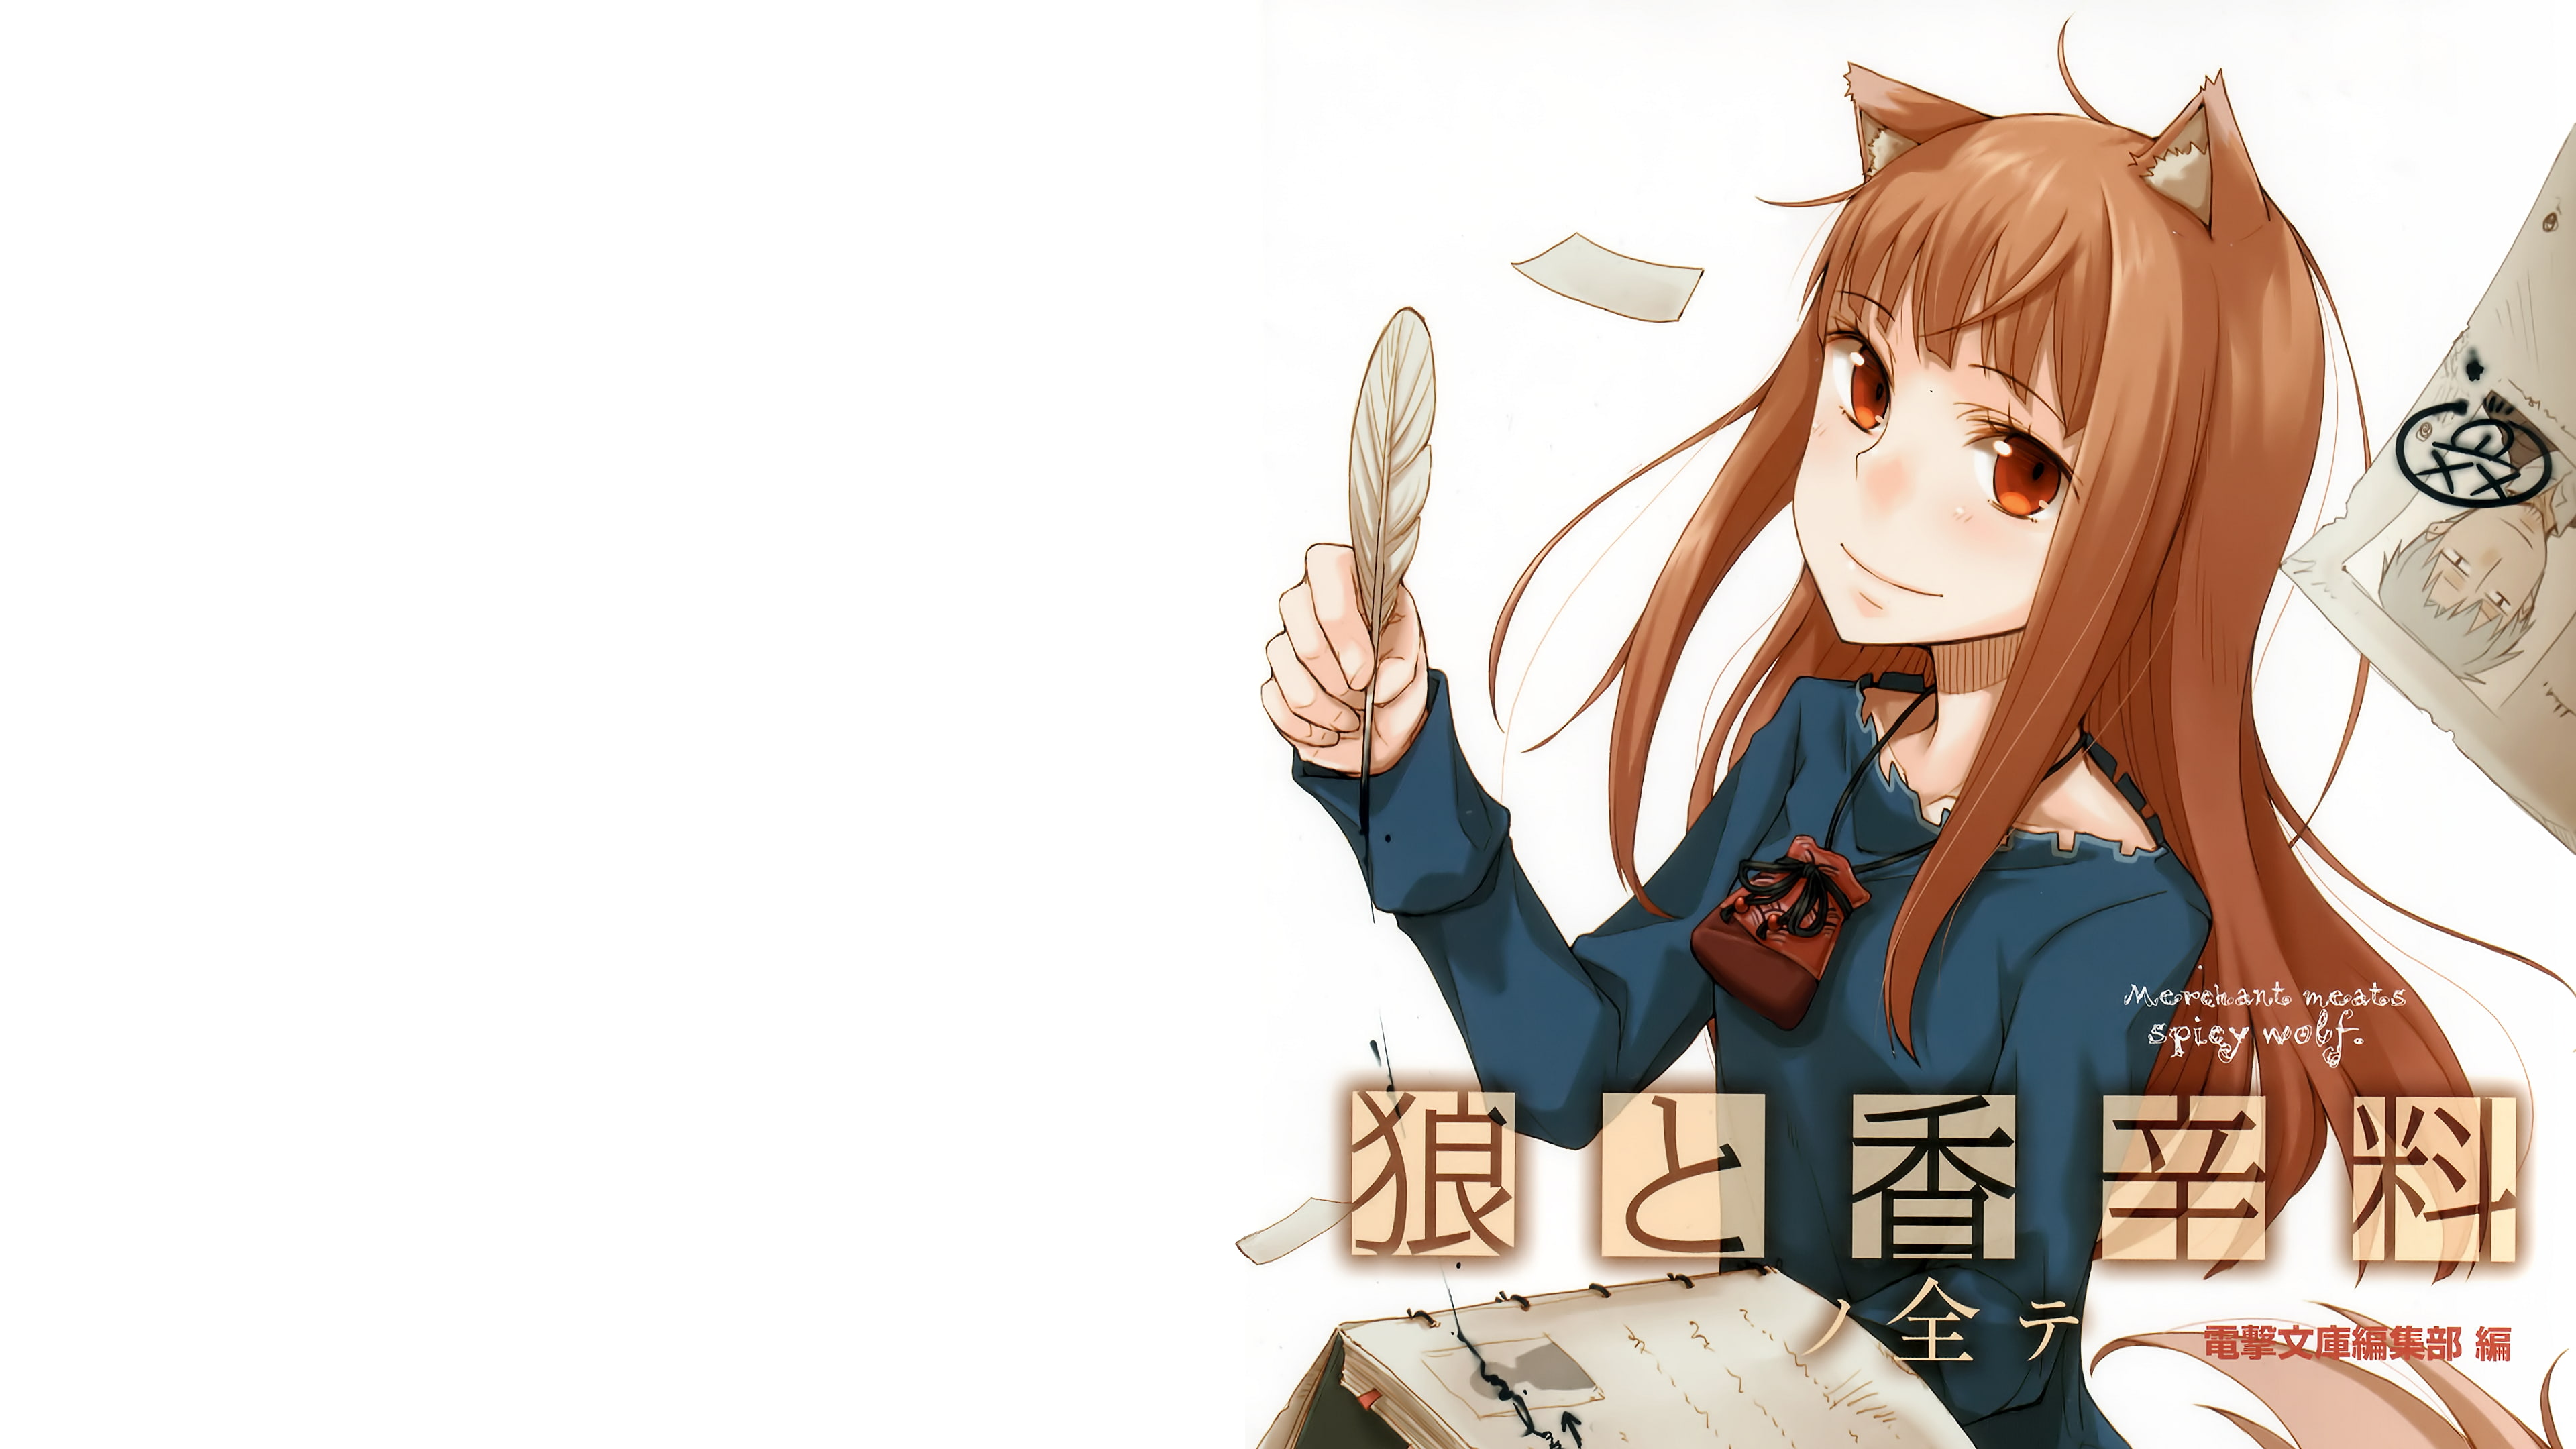 Spice and Wolf, Holo, anime girls, representation, copy space